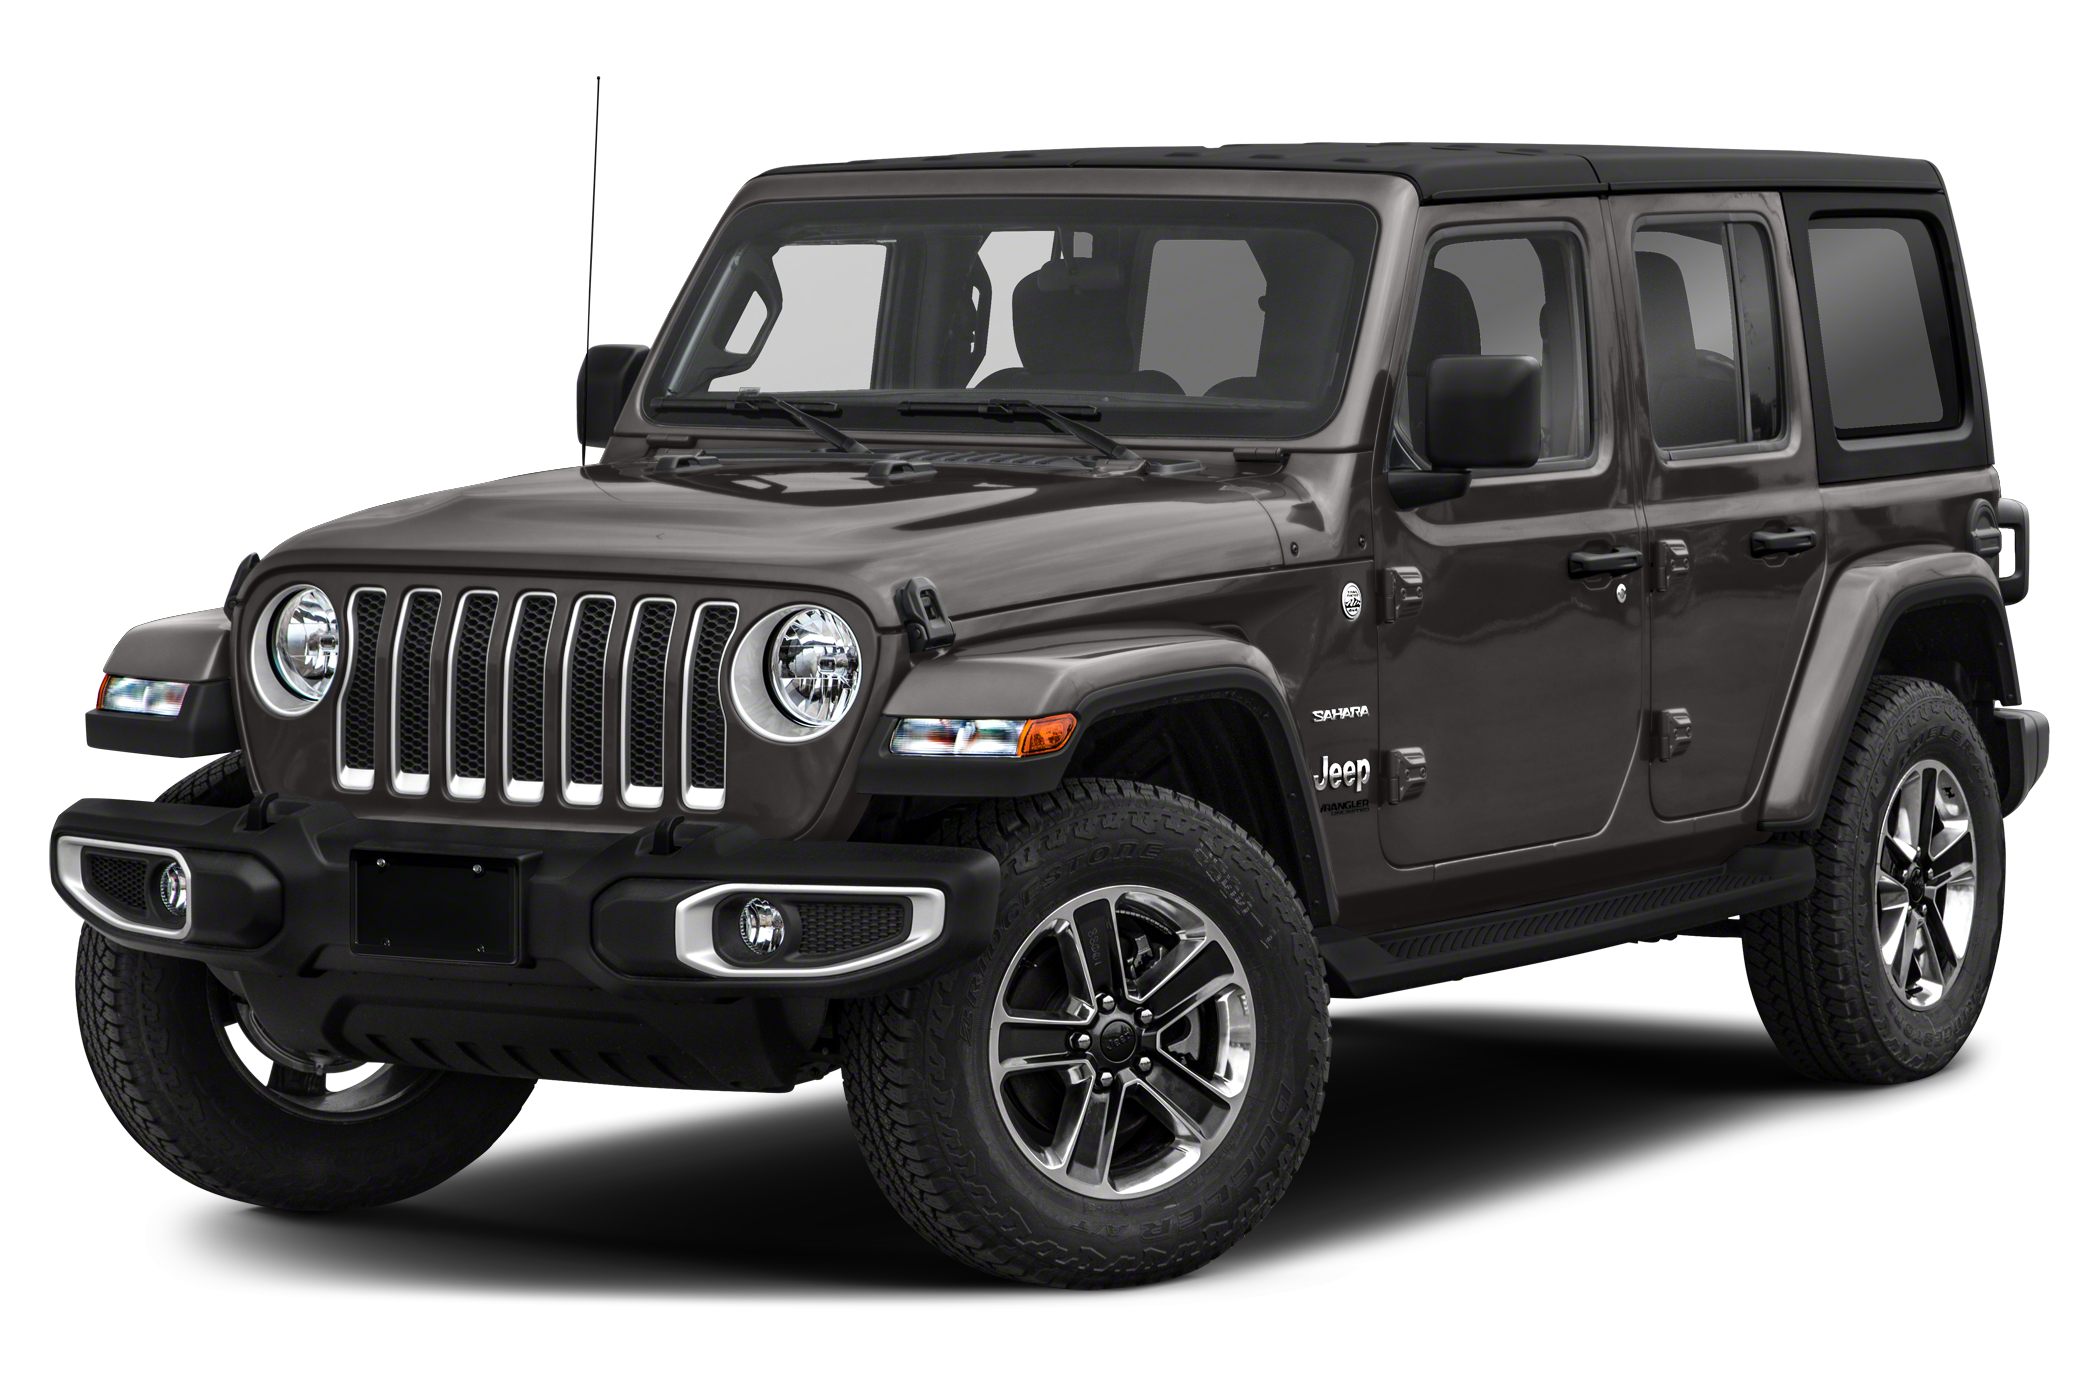 Great Deals on a new 2023 Jeep Wrangler Sahara 4dr 4x4 at The Autoblog Smart Buy Program